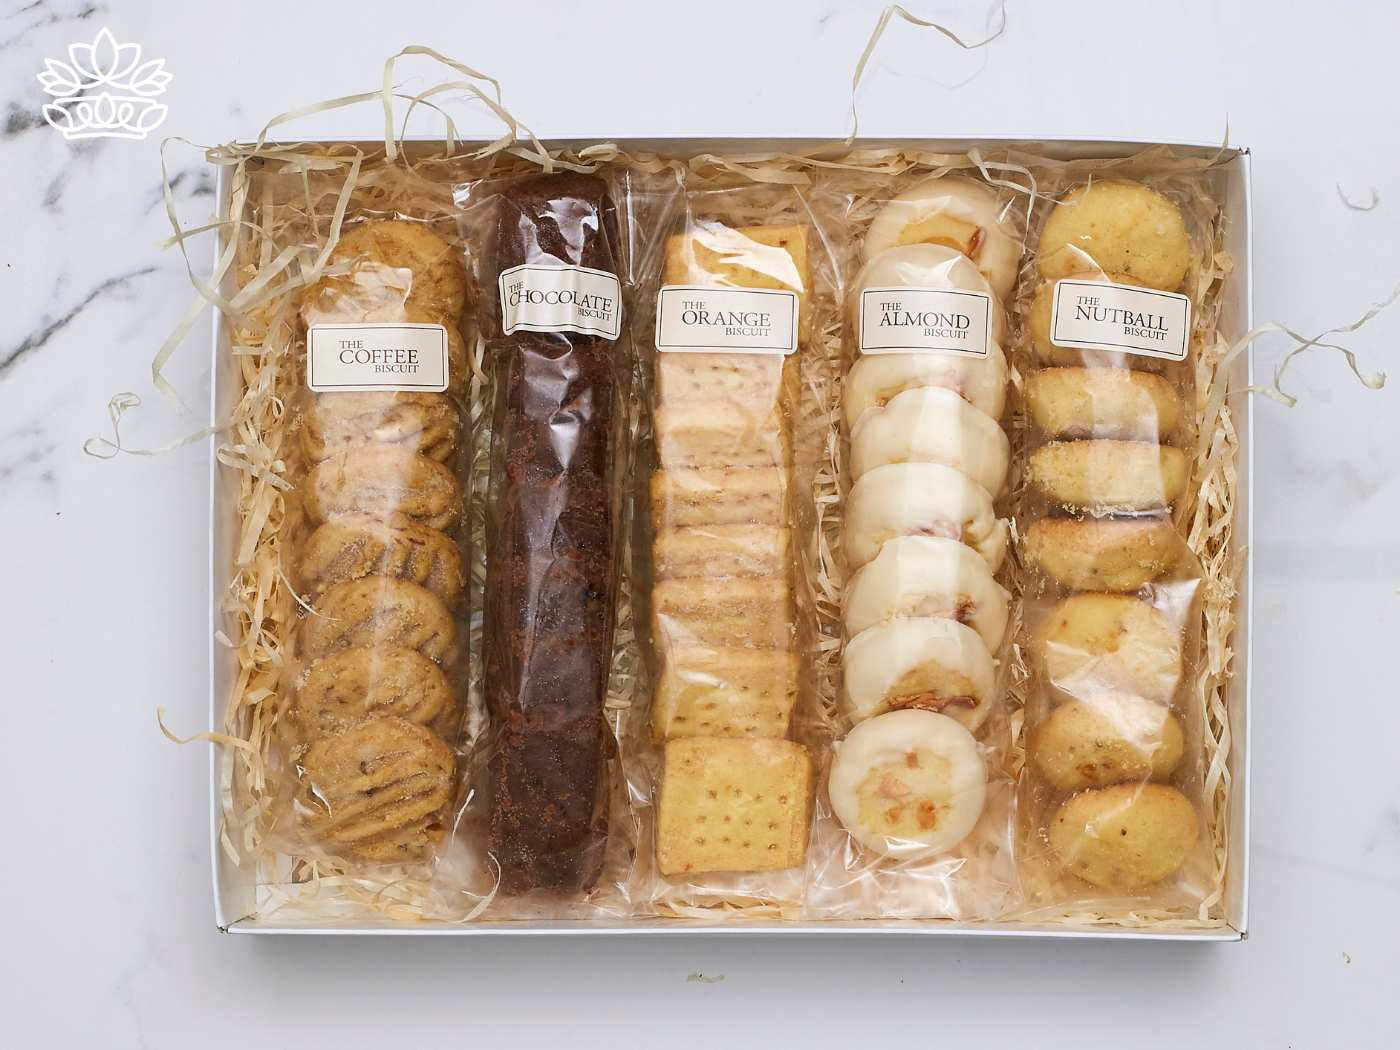 Exquisite assortment of gourmet biscuits in a gift box, featuring flavours such as coffee, chocolate, orange, almond, and nutball, all delicately arranged and presented. This selection is crafted by Fabulous Flowers and Gifts, ideal for enhancing the guest experience in hotels and guest houses with a heartfelt touch